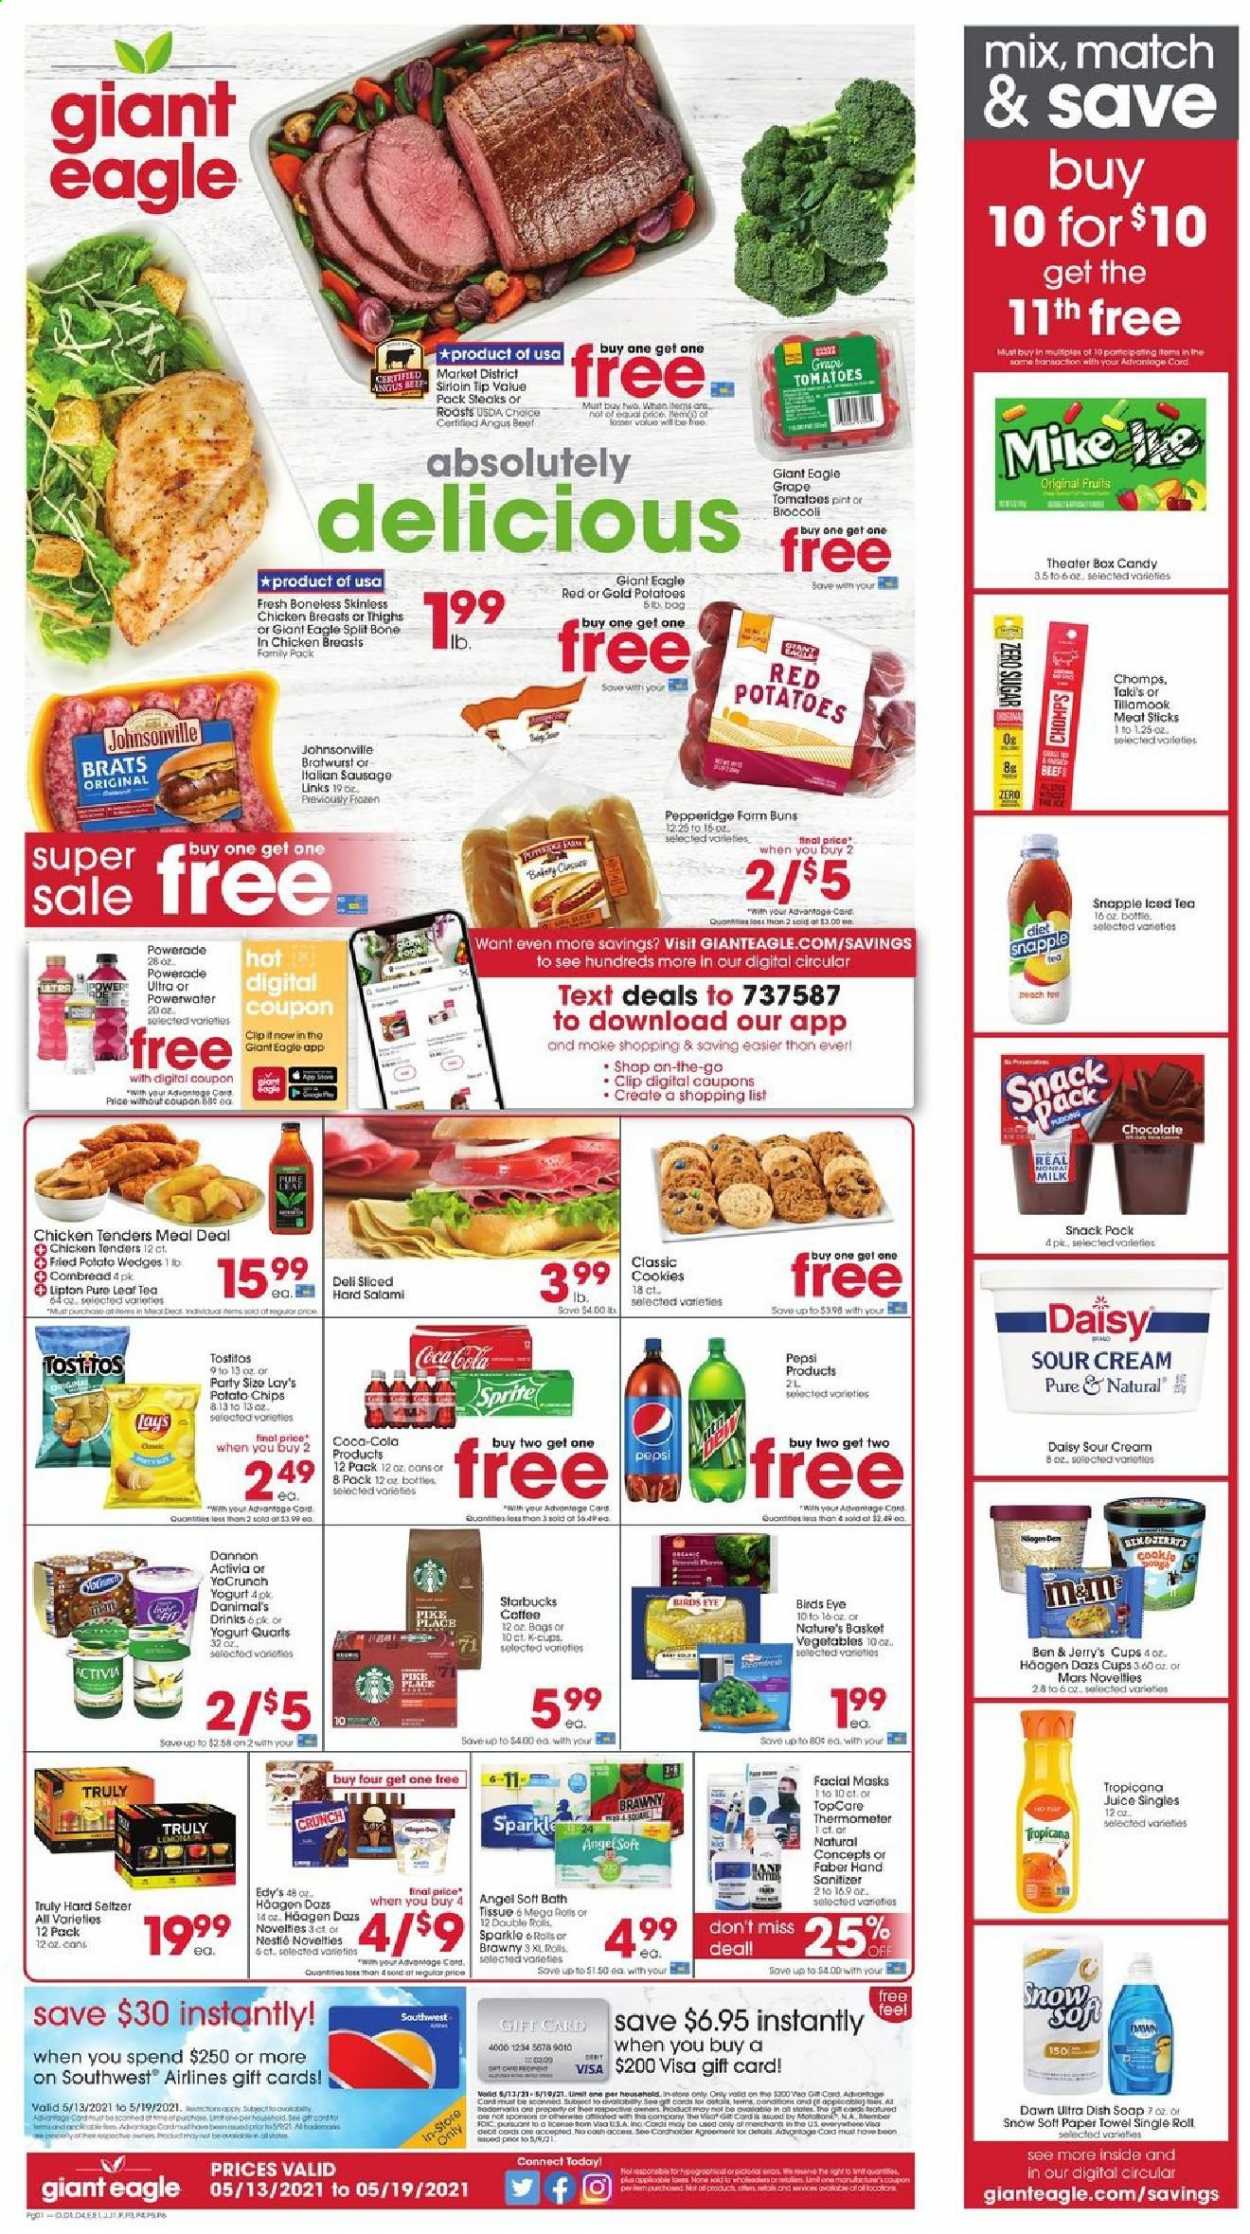 thumbnail - Giant Eagle Flyer - 05/13/2021 - 05/19/2021 - Sales products - buns, broccoli, tomatoes, red potatoes, Bird's Eye, salami, Johnsonville, bratwurst, sausage, italian sausage, yoghurt, Activia, Dannon, milk, sour cream, Häagen-Dazs, Ben & Jerry's, cookies, chocolate, Mars, potato chips, chips, Lay’s, Tostitos, Coca-Cola, Sprite, Powerade, Pepsi, juice, Lipton, Snapple, Pure Leaf, coffee, Starbucks, coffee capsules, K-Cups, Hard Seltzer, TRULY, chicken breasts, chicken tenders, beef meat, beef sirloin, steak, bath tissue, paper towels, Rin, soap, hand sanitizer, basket, thermometer. Page 1.